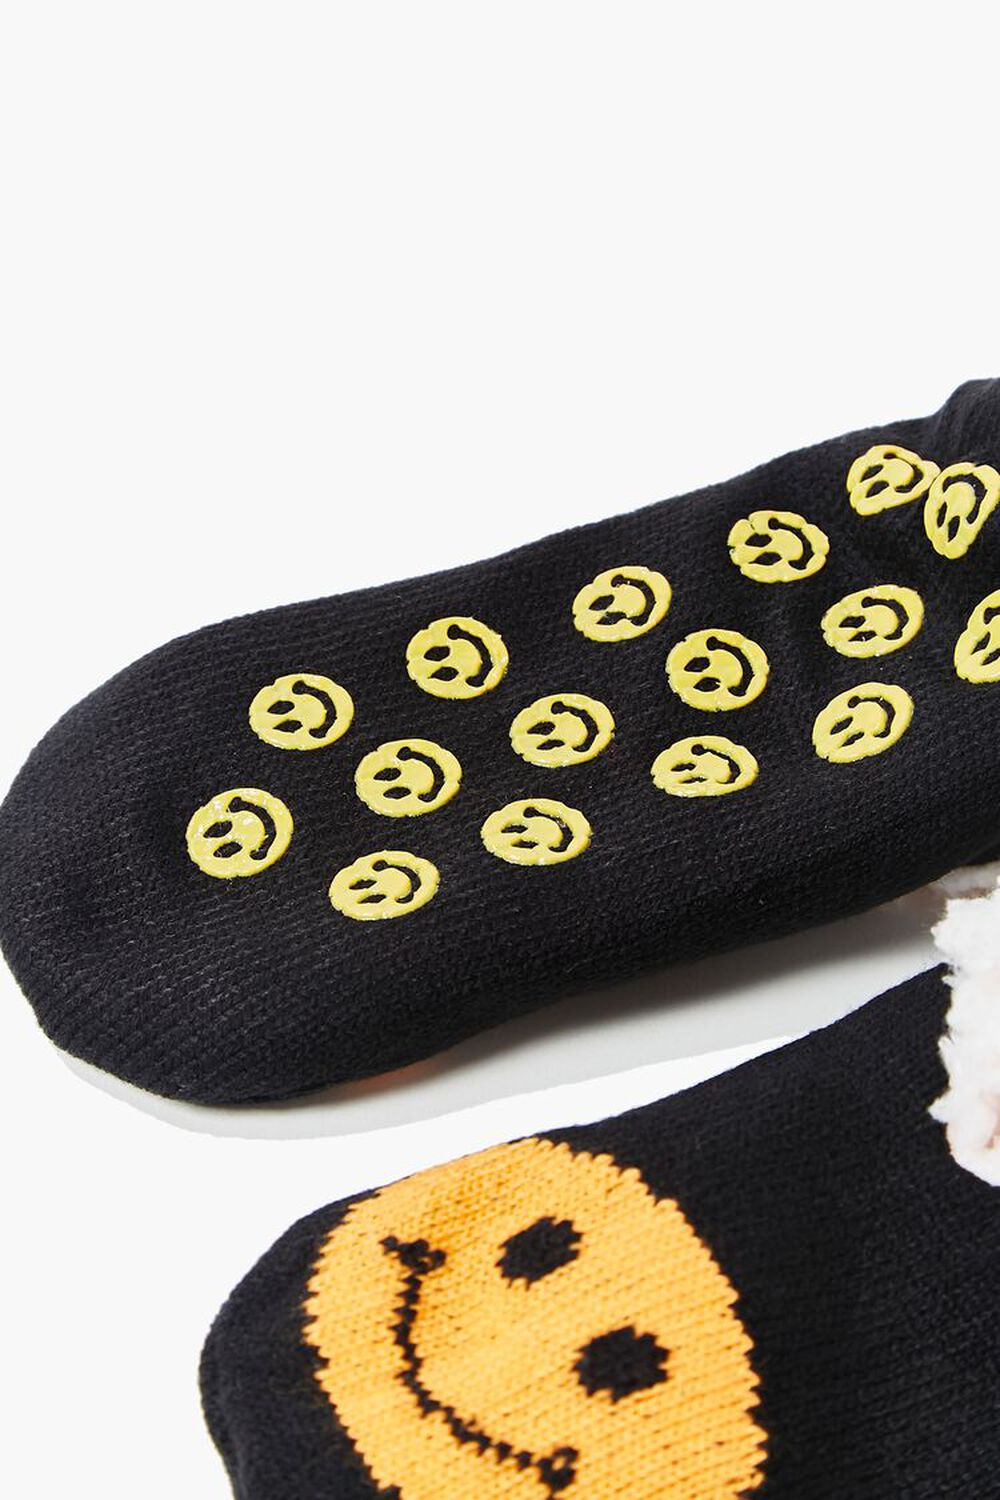 BLACK/YELLOW Happy Face Indoor Slippers, image 3